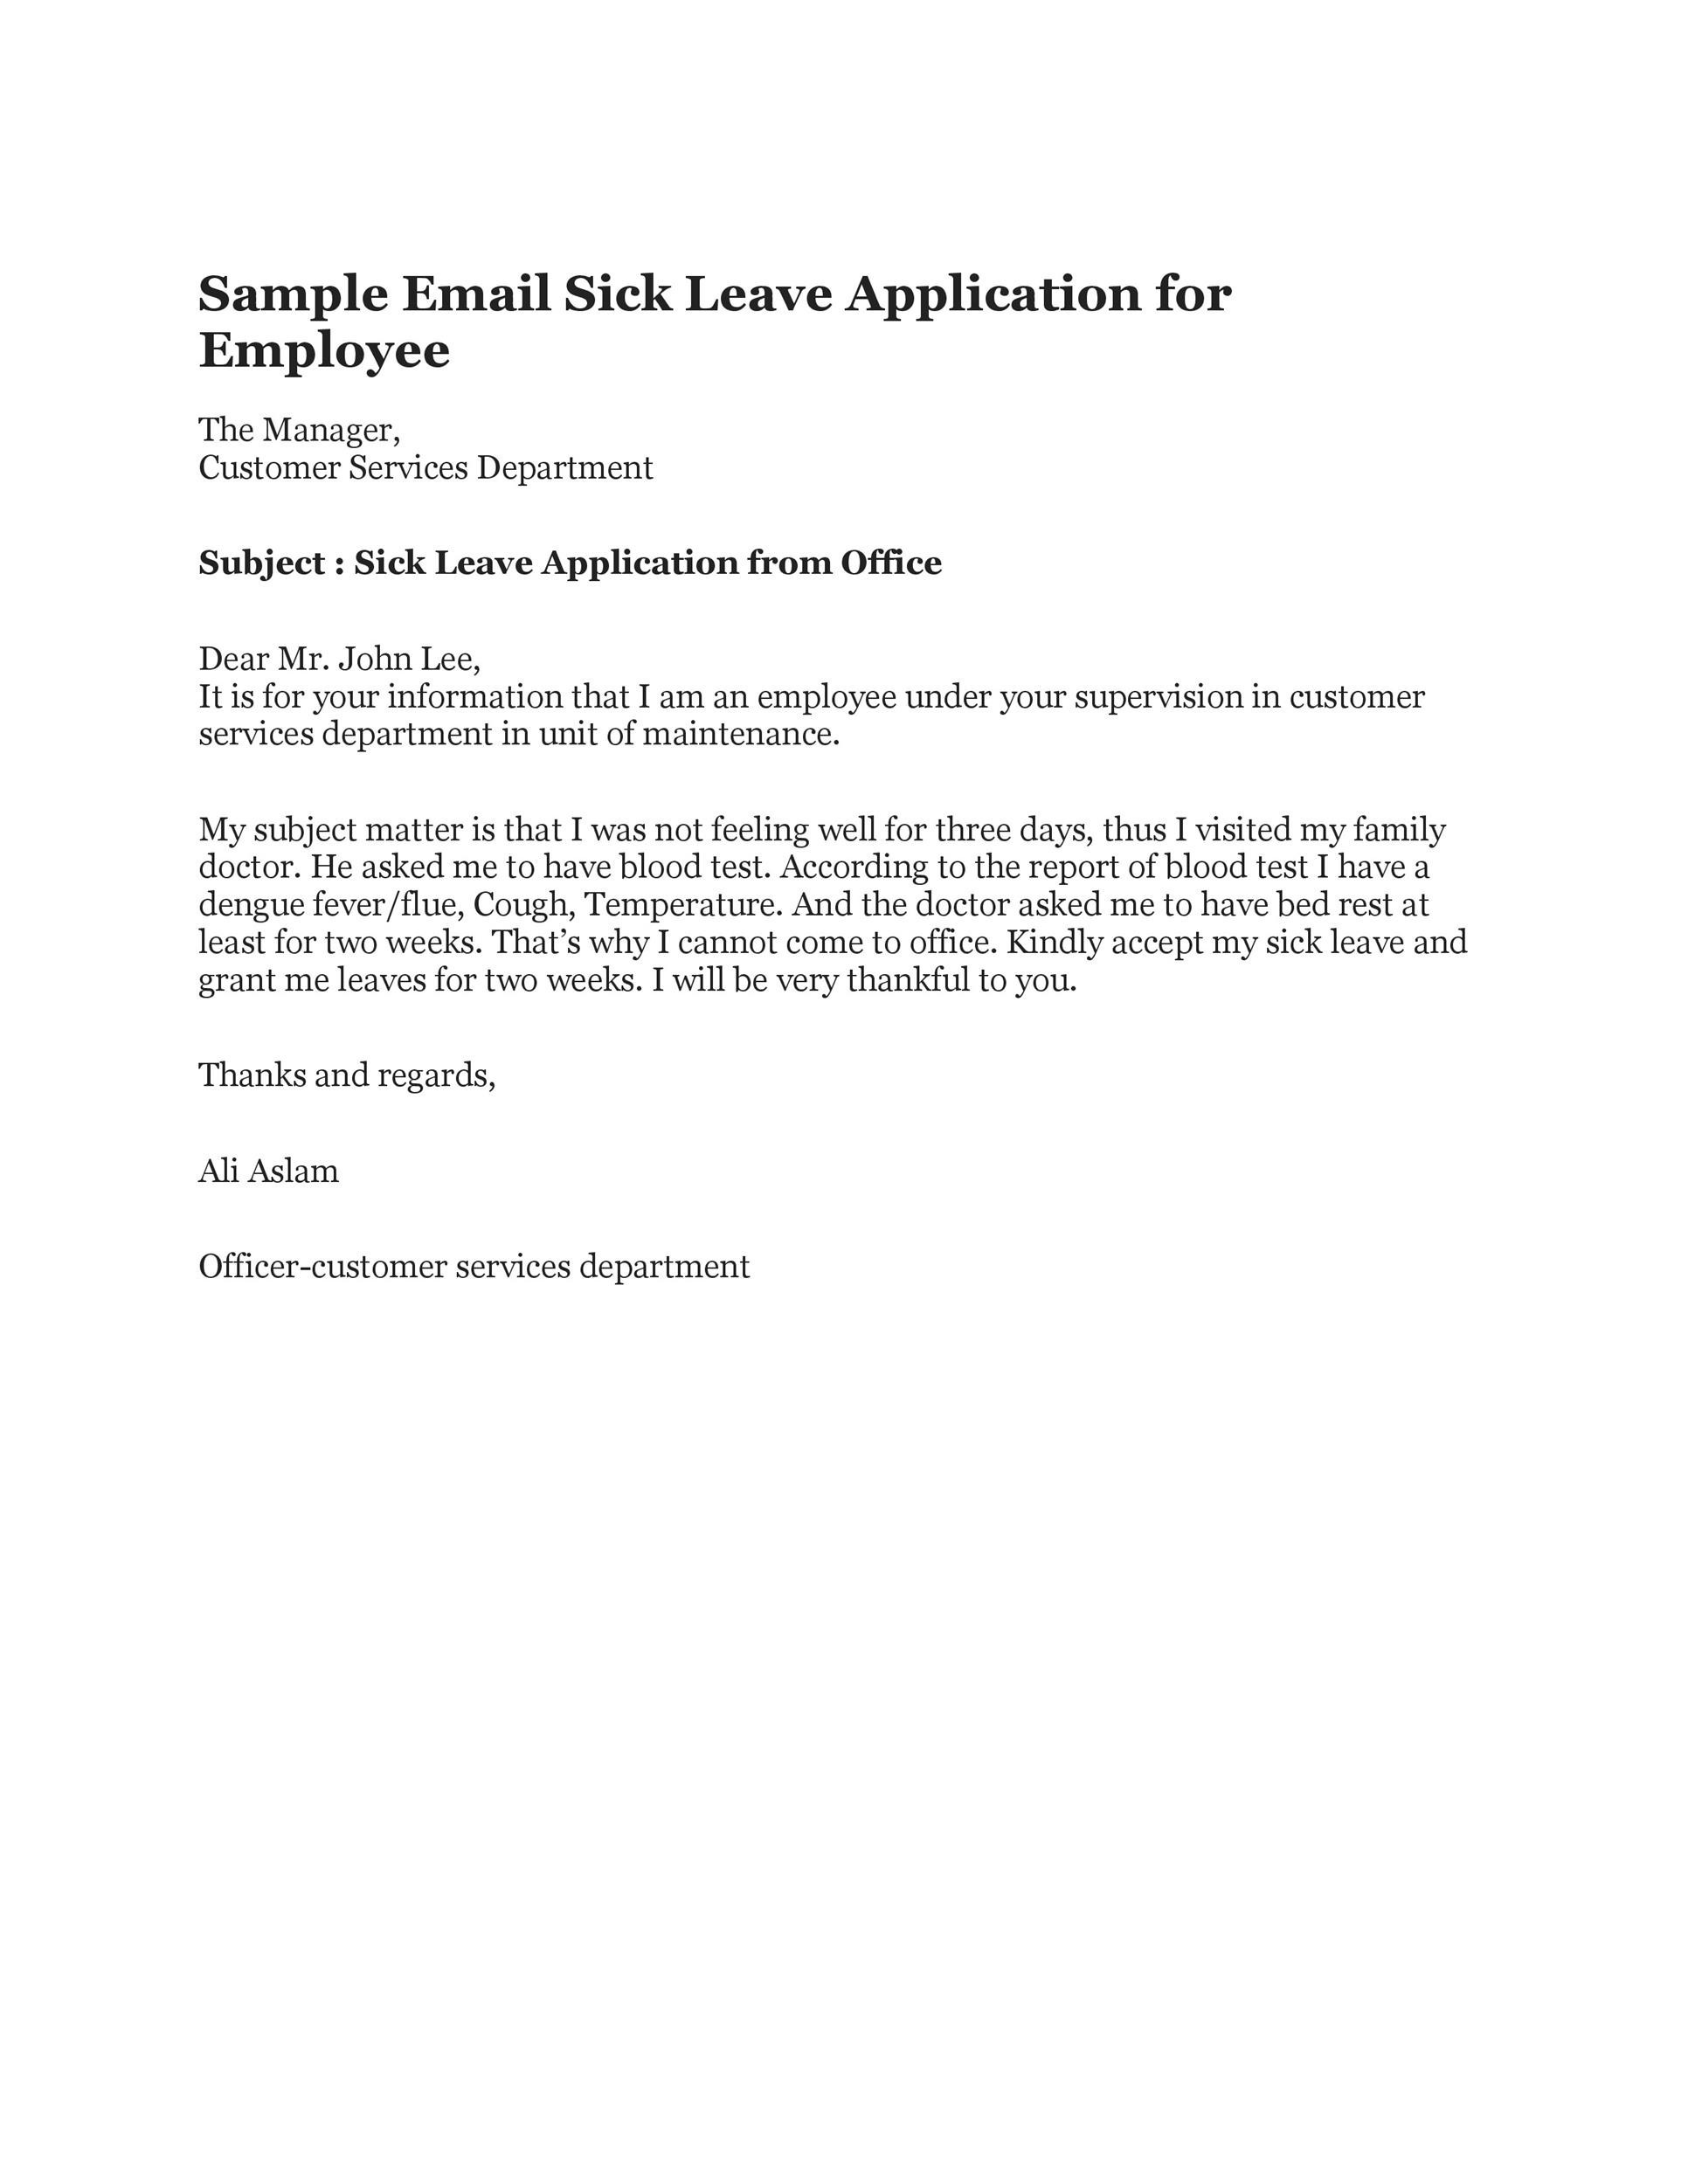 Free sick leave email 32